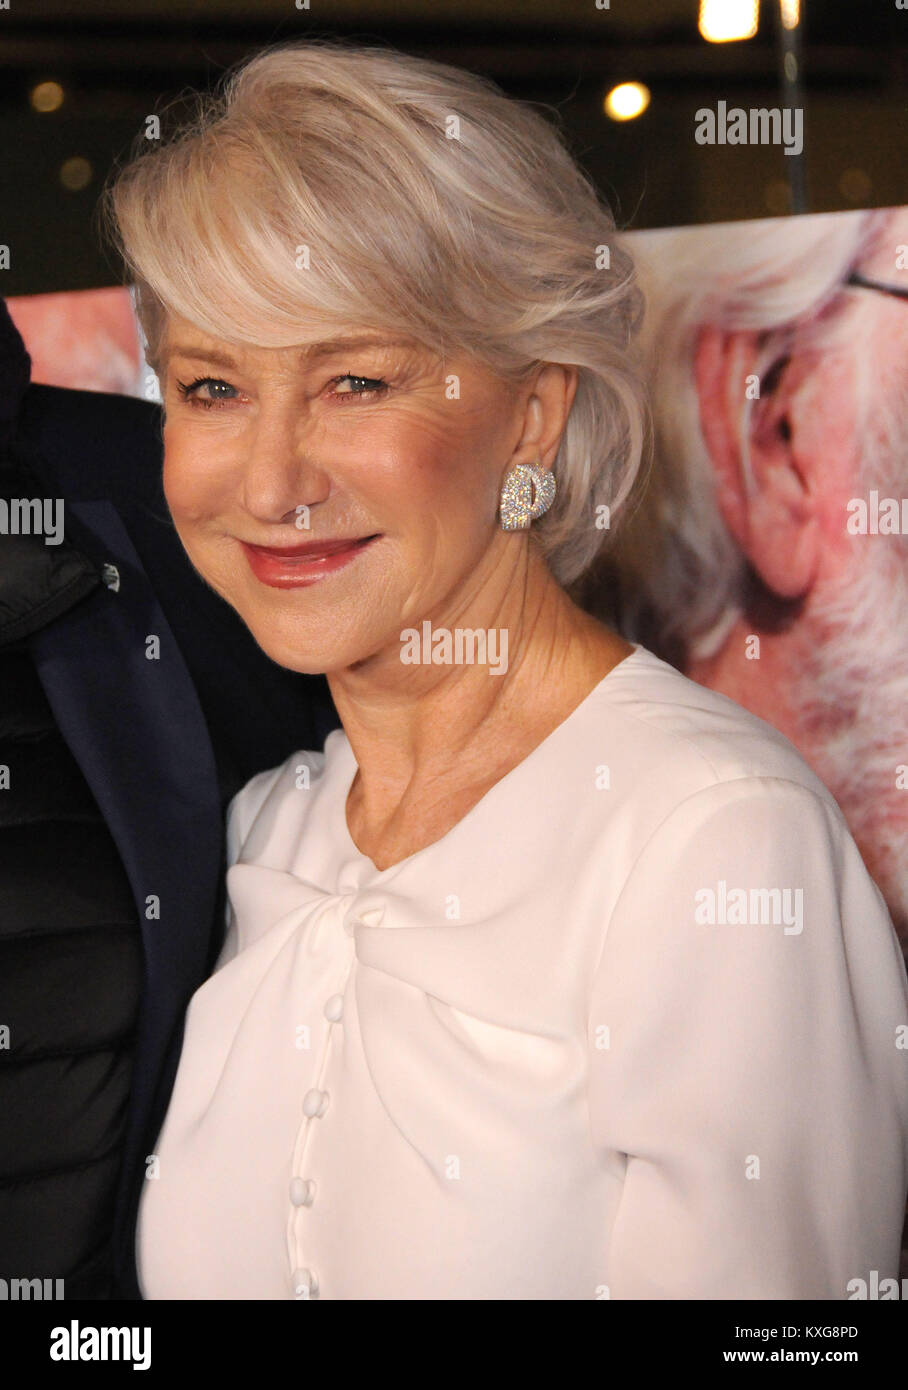 West Hollywood, California, USA. 9th January, 2018. Actress Helen Mirren attends the Los Angeles Premiere of 'The Leisure Seeker' at Pacific Design Center on January 9, 2018 in West Hollywood, California. Photo by Barry King/Alamy Live News Stock Photo